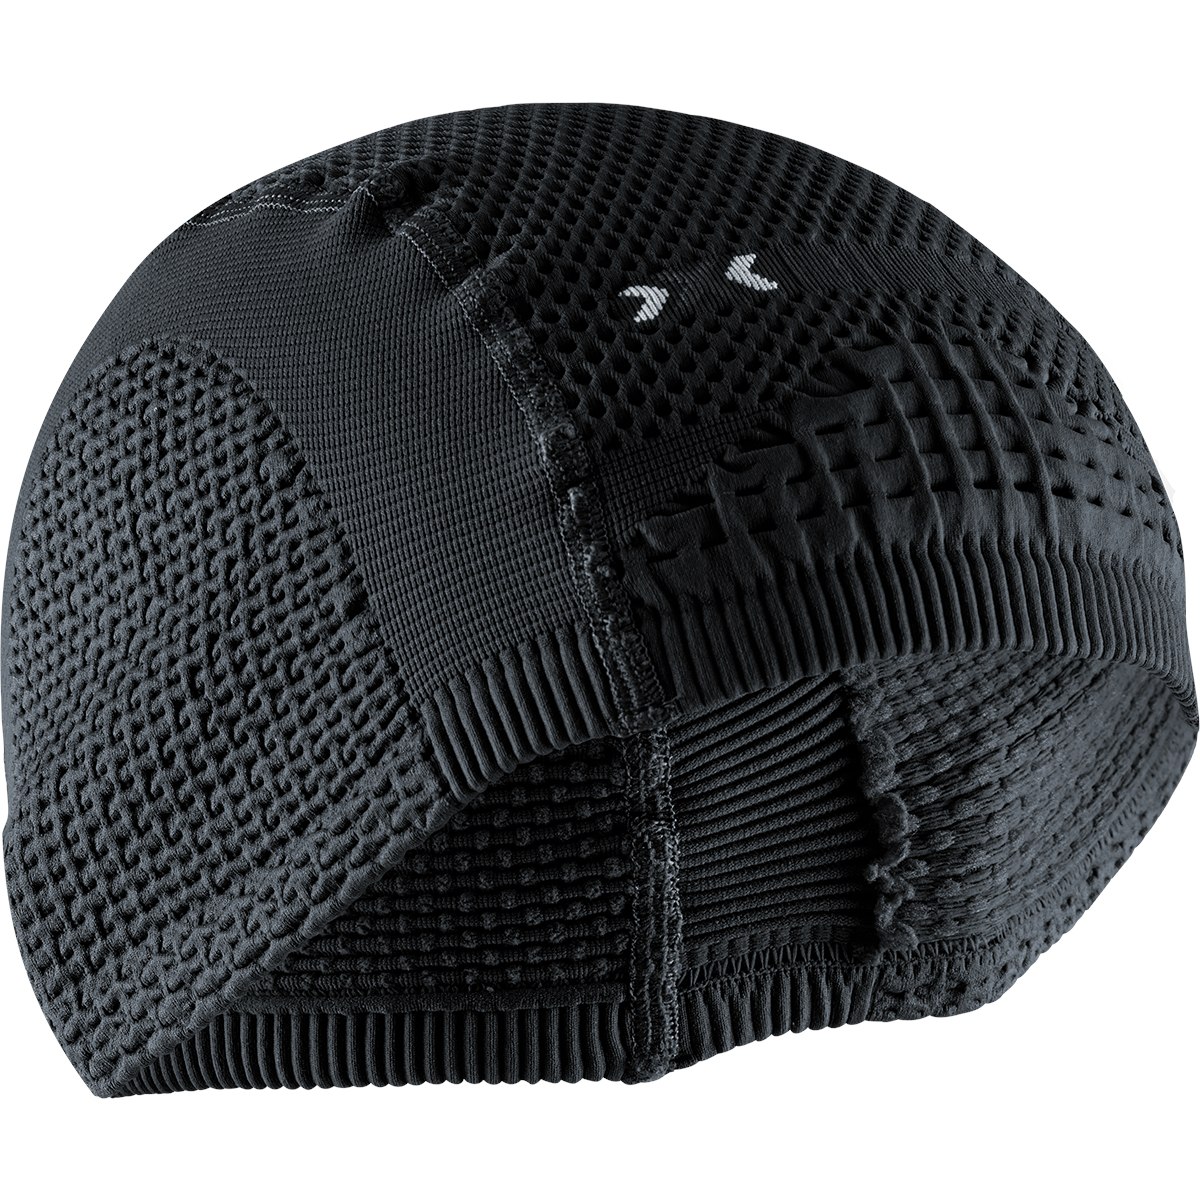 Picture of X-Bionic Soma Cap Light 4.0 - black/charcoal